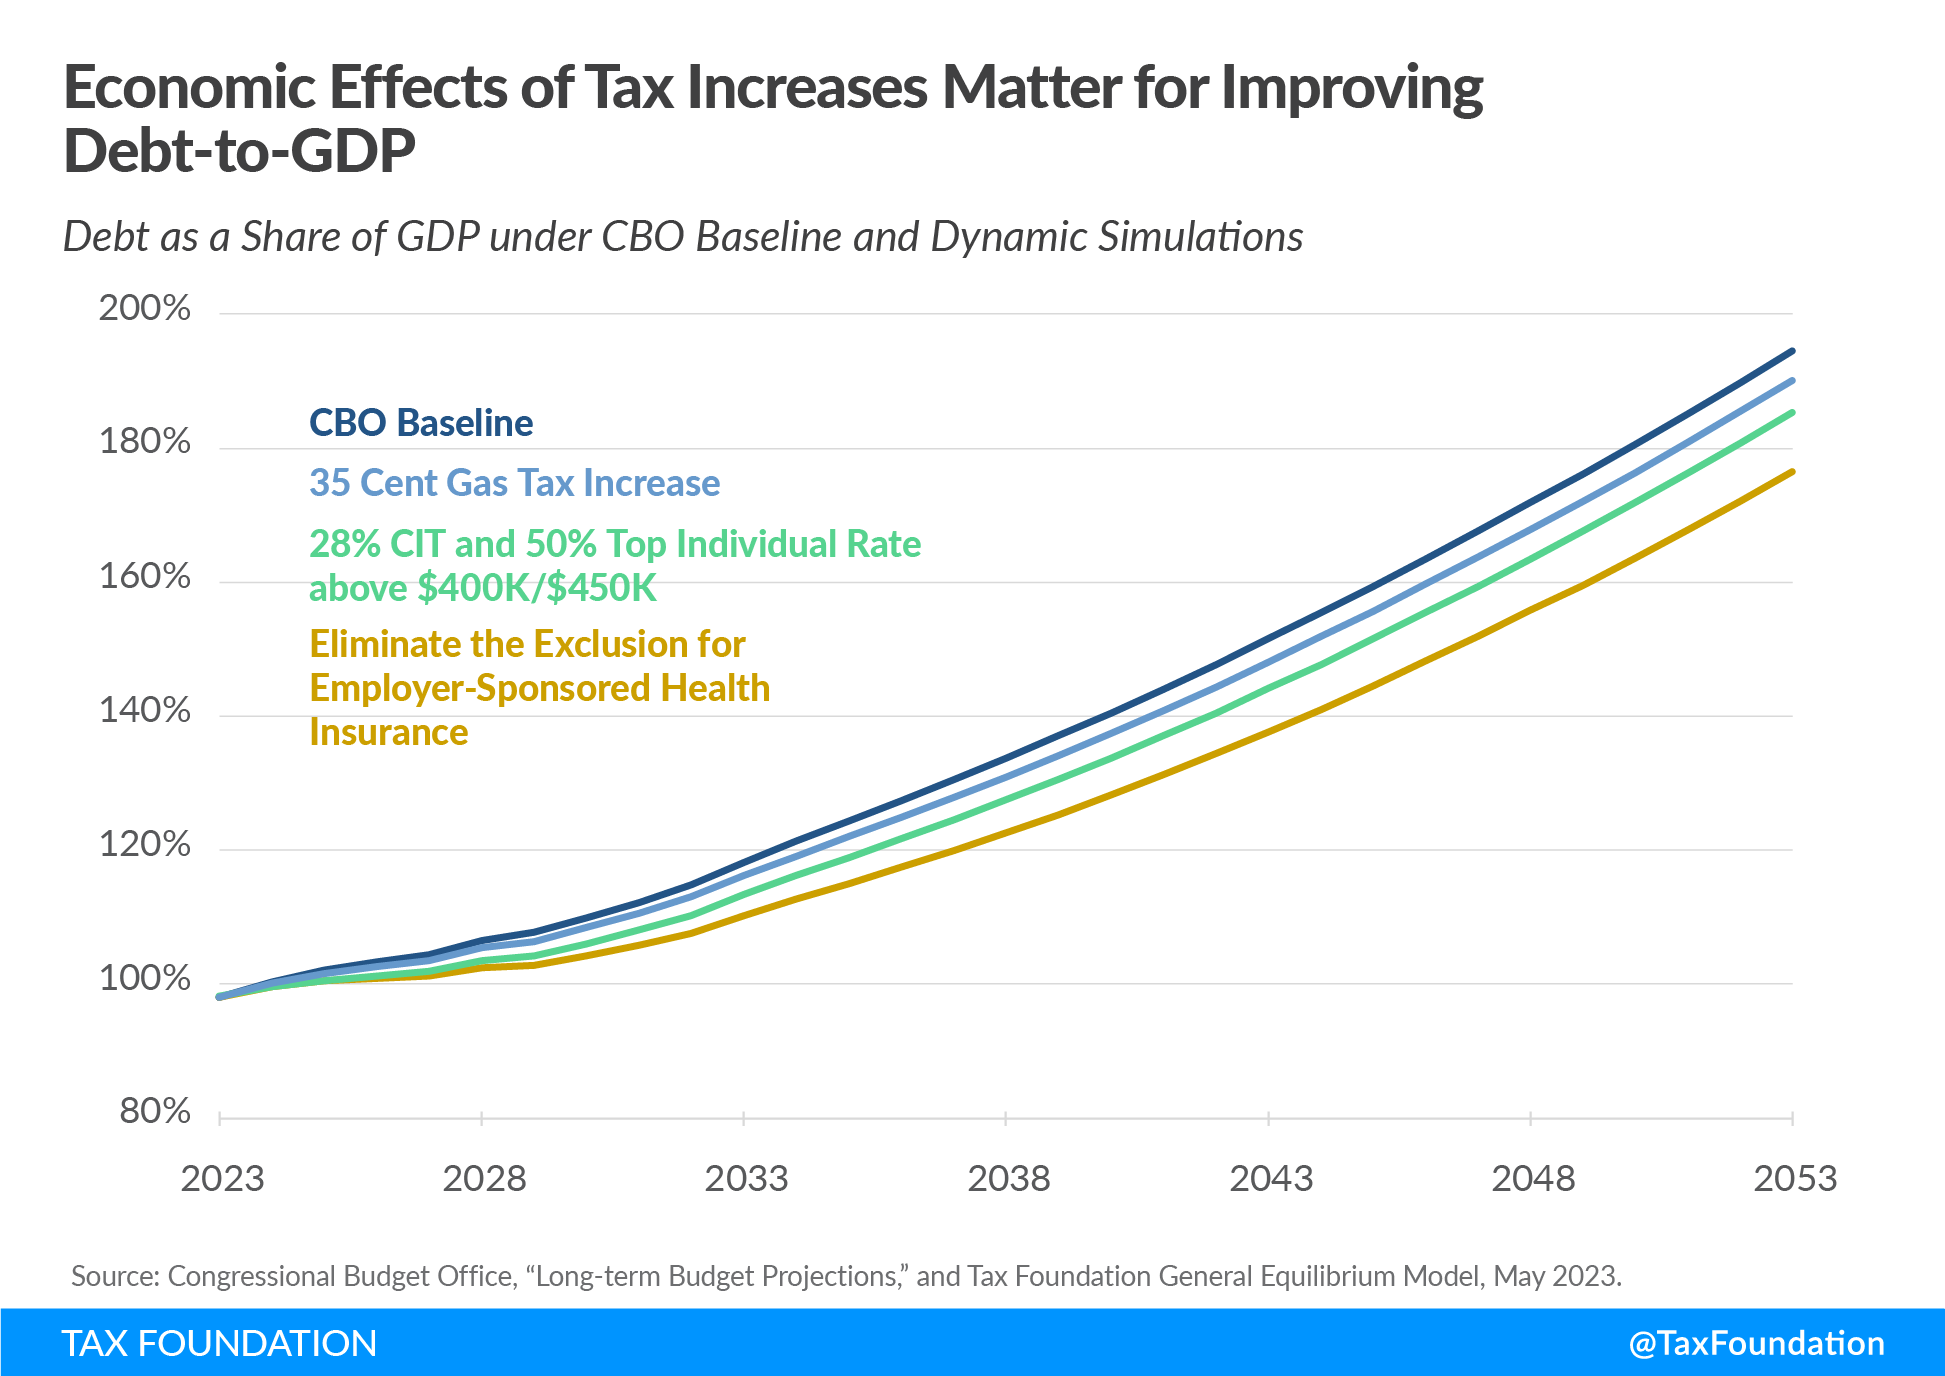 Design Matters When Raising Taxes to Reduce the Deficit and Stabilize the Debt-to-GDP ratio US debt taxes deficits